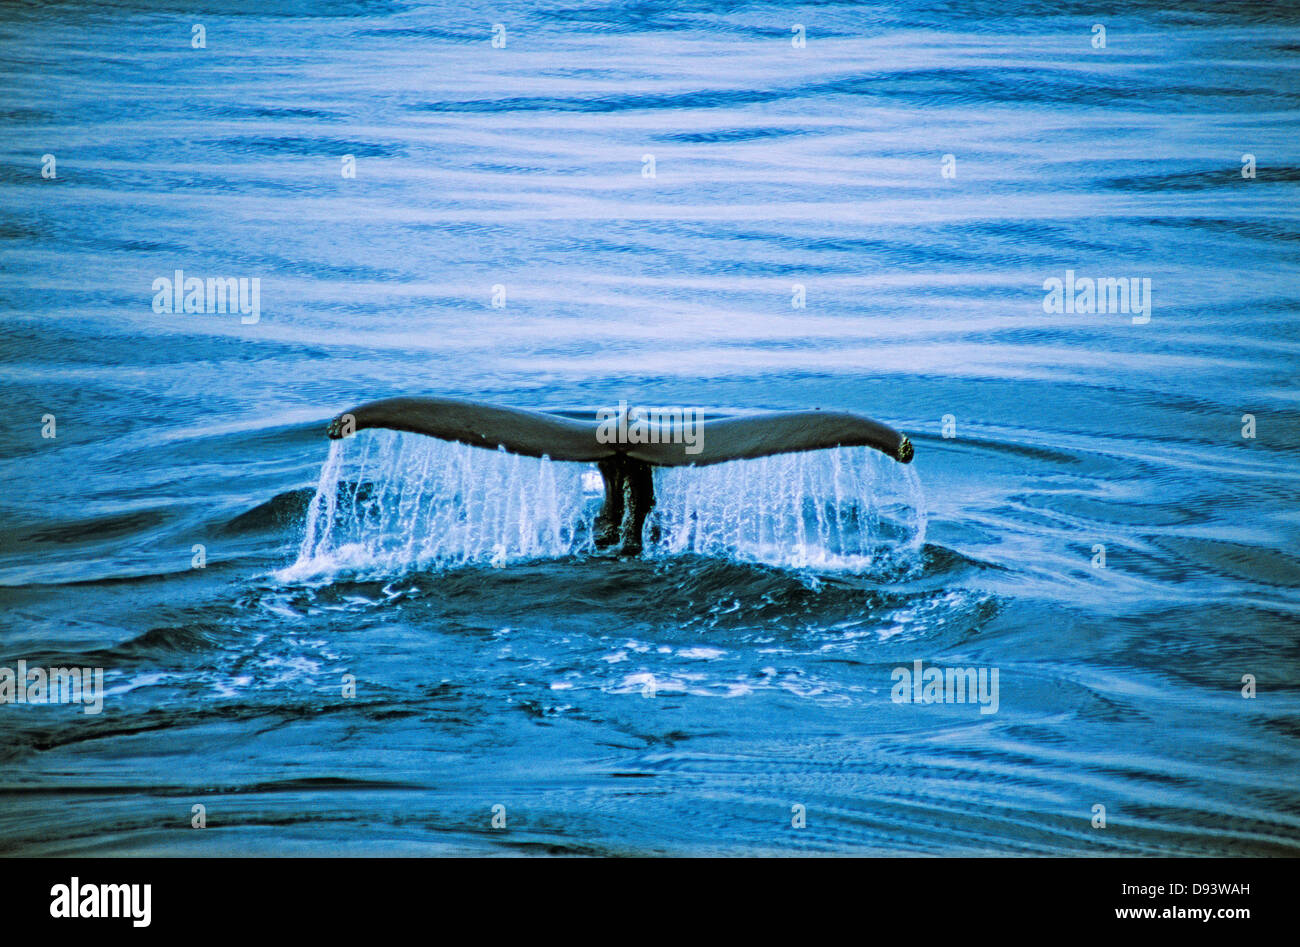 Humpback whales tail above water Stock Photo